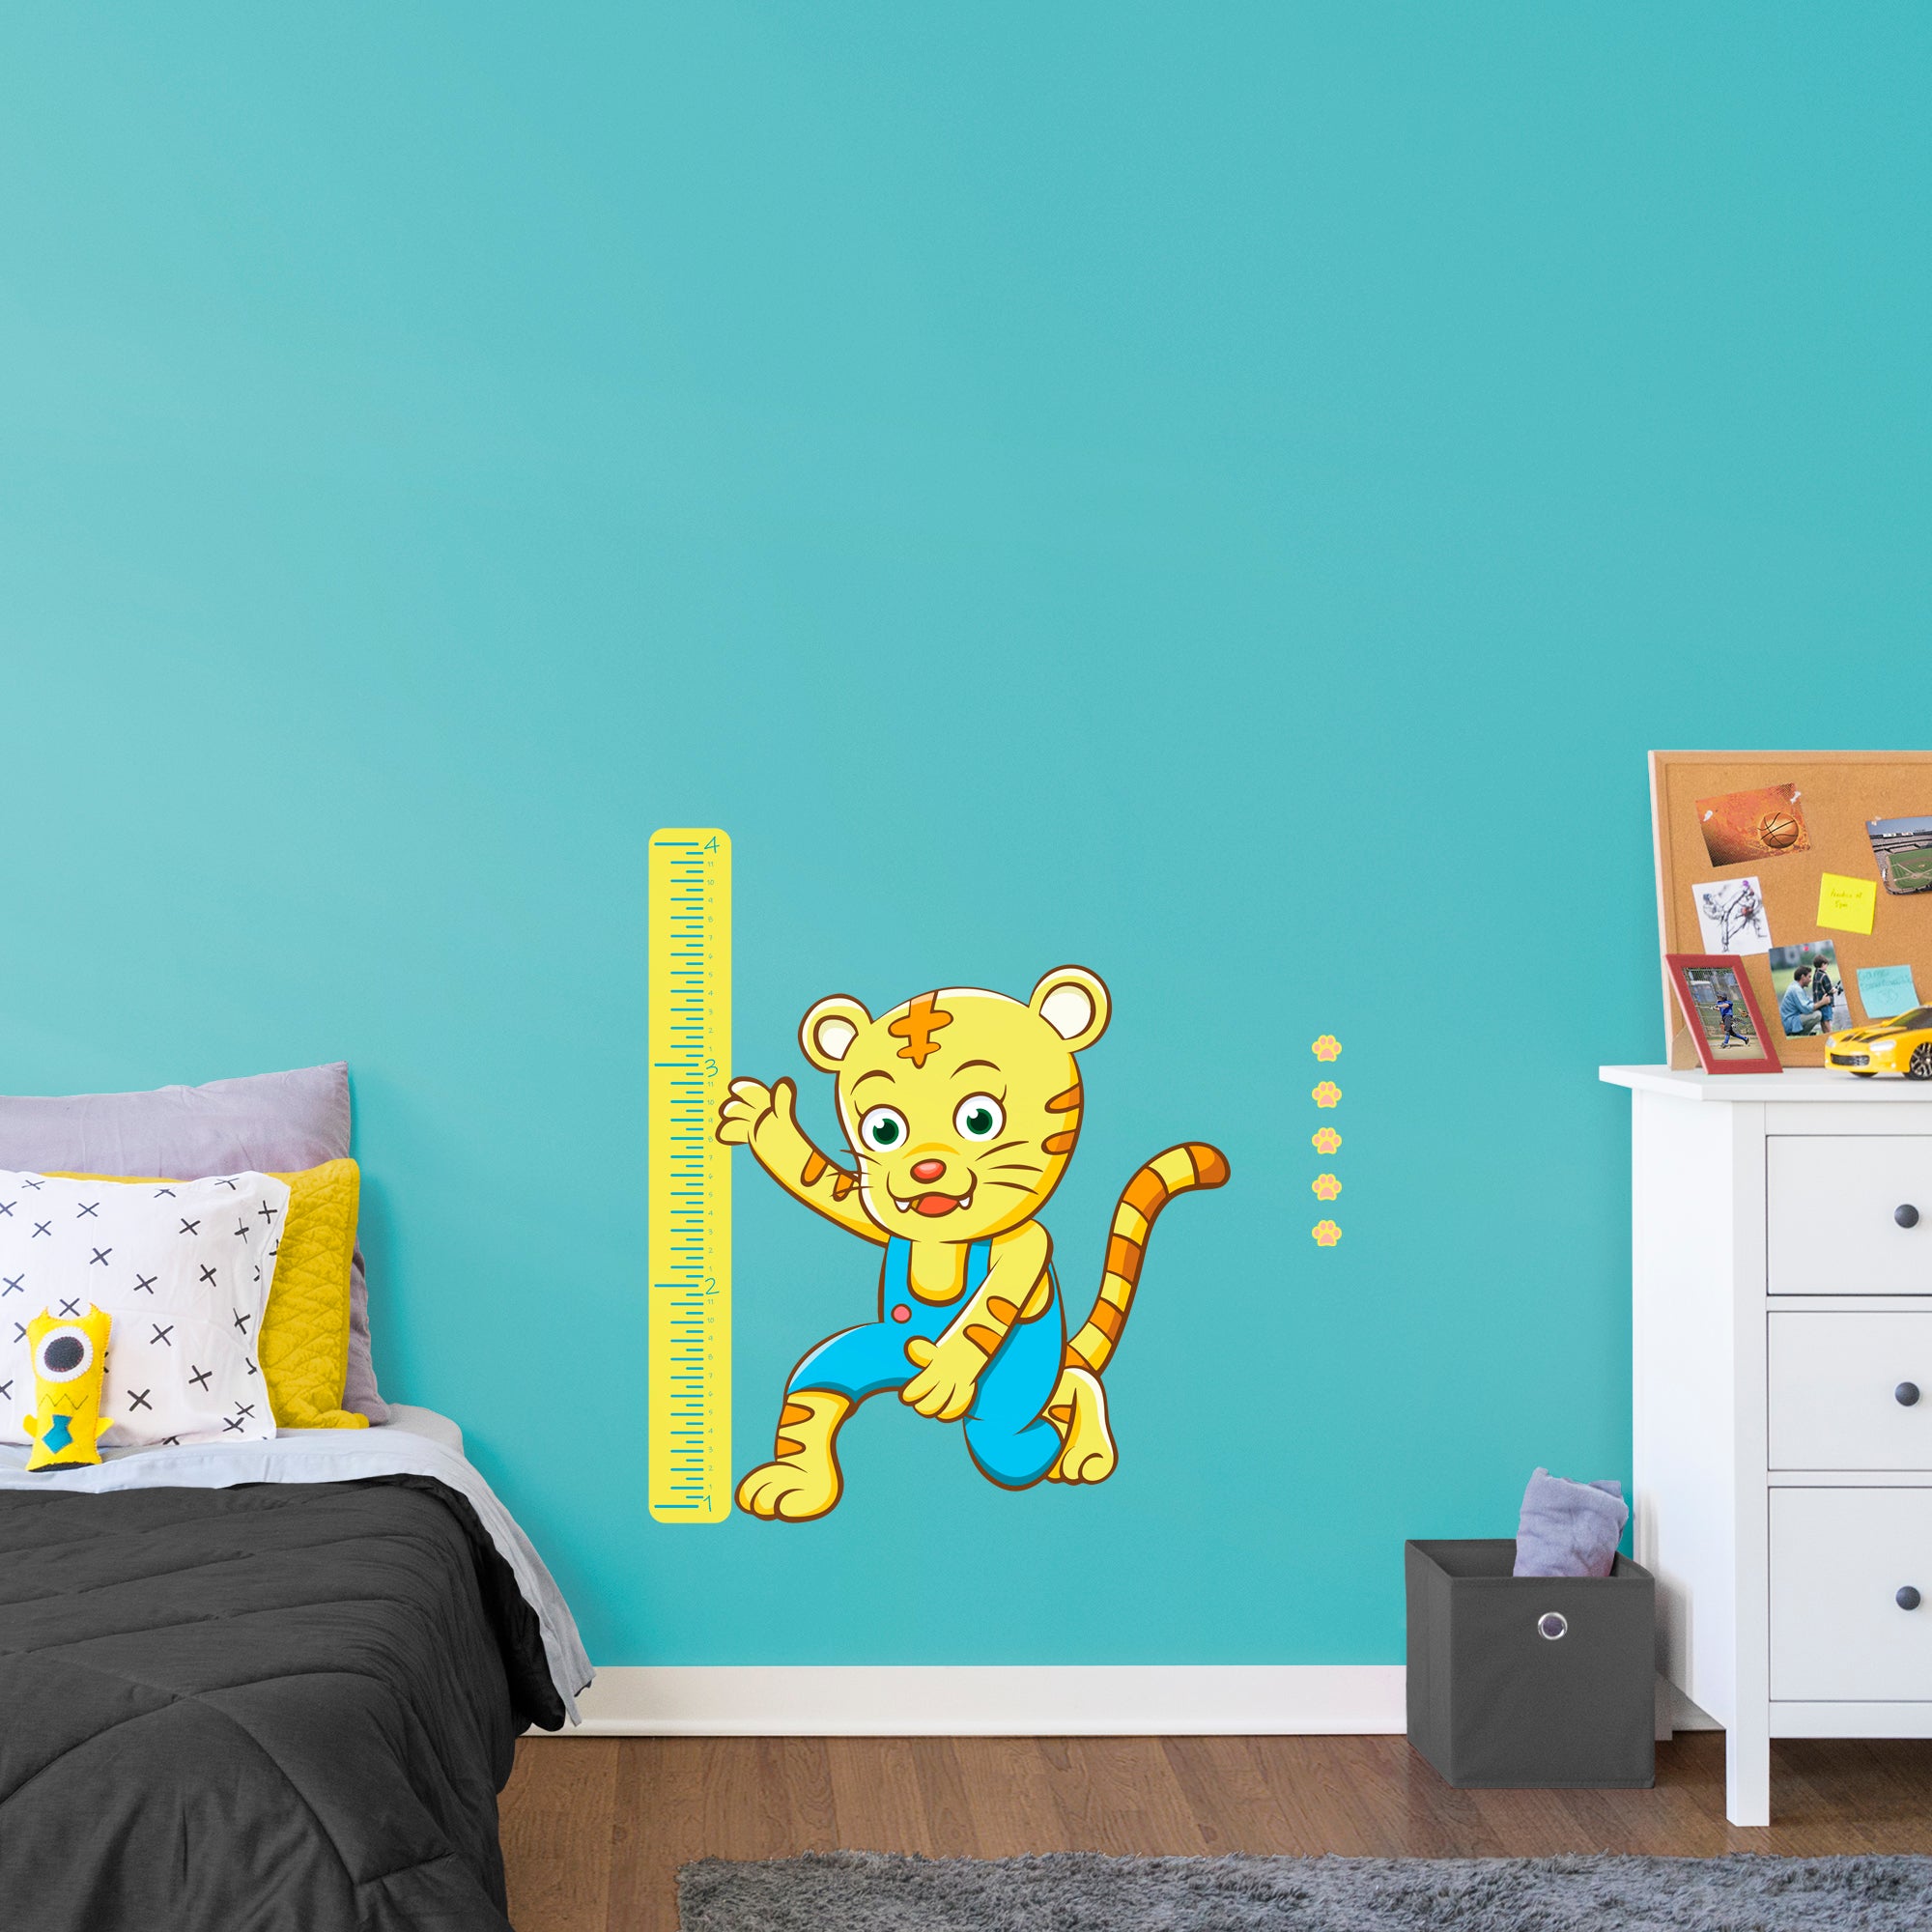 Growth Chart Cheetah - Removable Wall Decal Growth Chart (32"W x 38"H) by Fathead | Vinyl